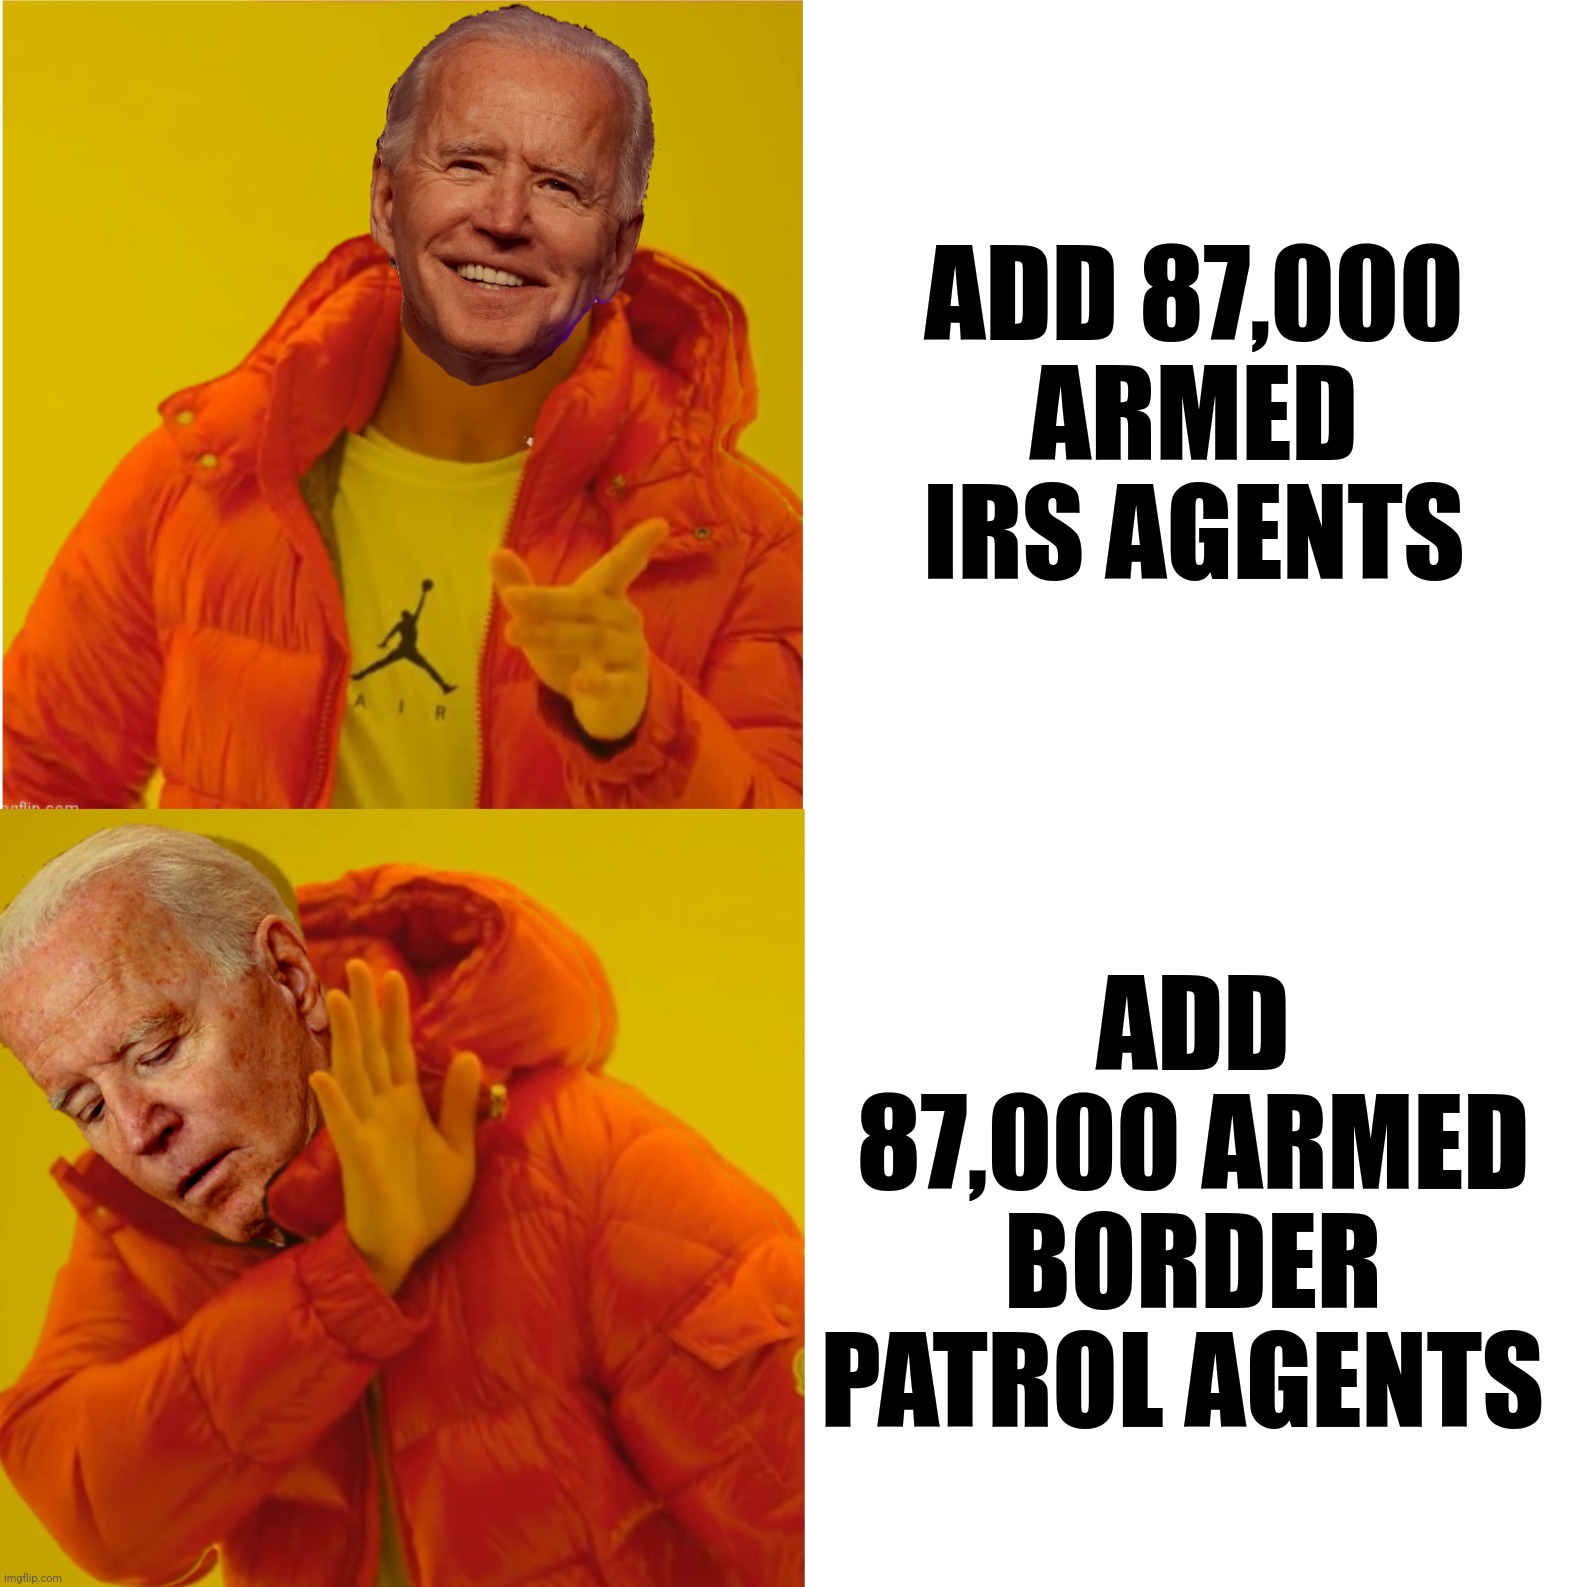 ADD 87,000 ARMED IRS AGENTS ADD 87,000 ARMED BORDER PATROL AGENTS | made w/ Imgflip meme maker